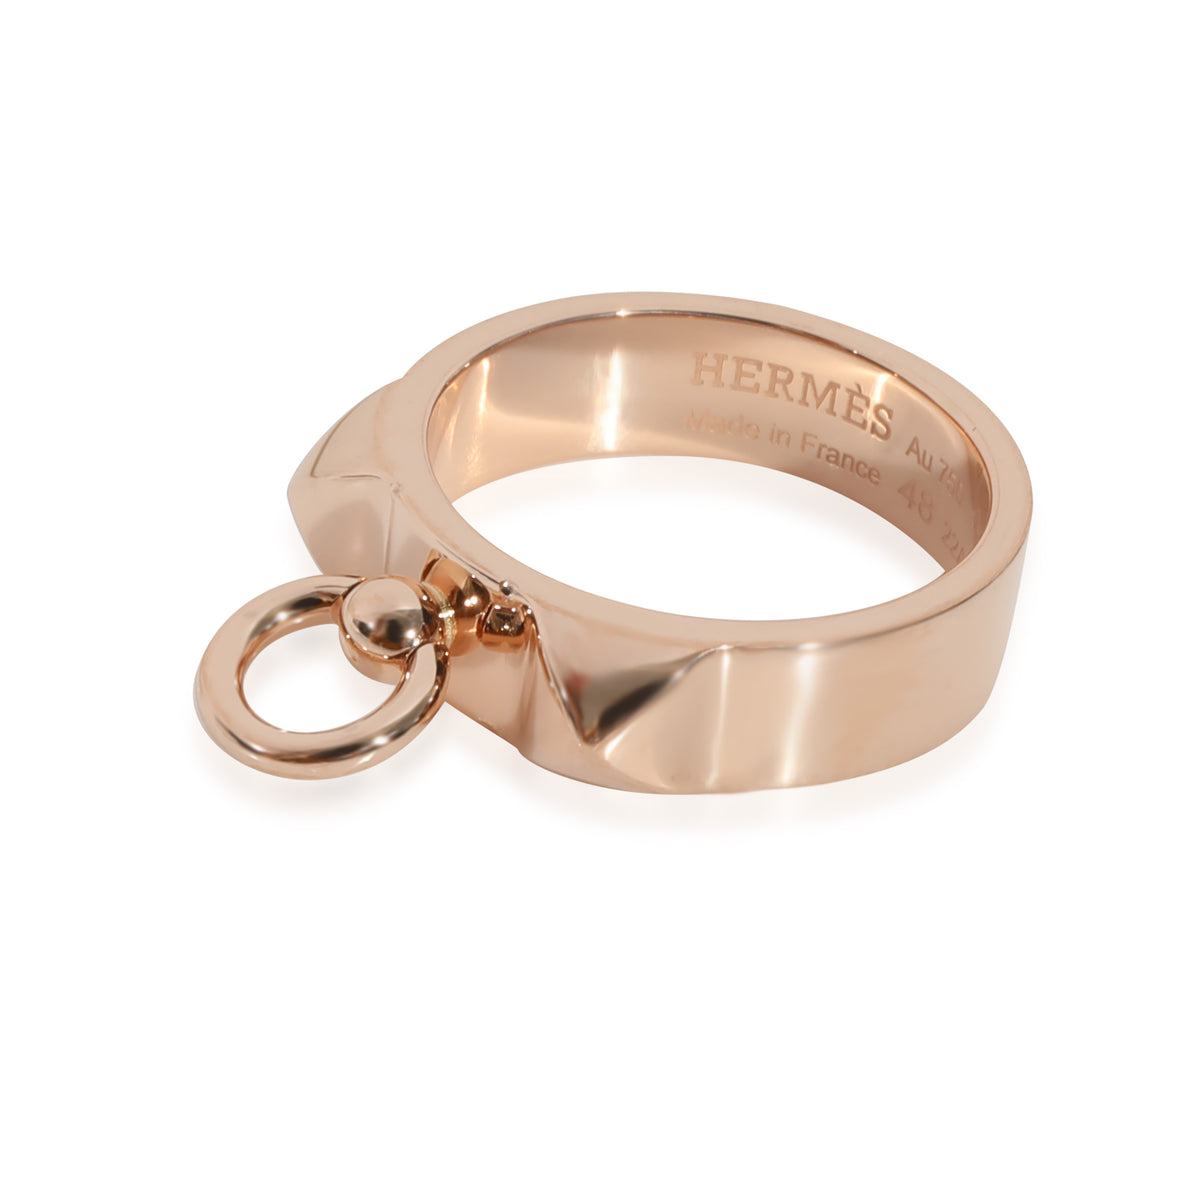 Collier de Chien Band in 18k Rose Gold